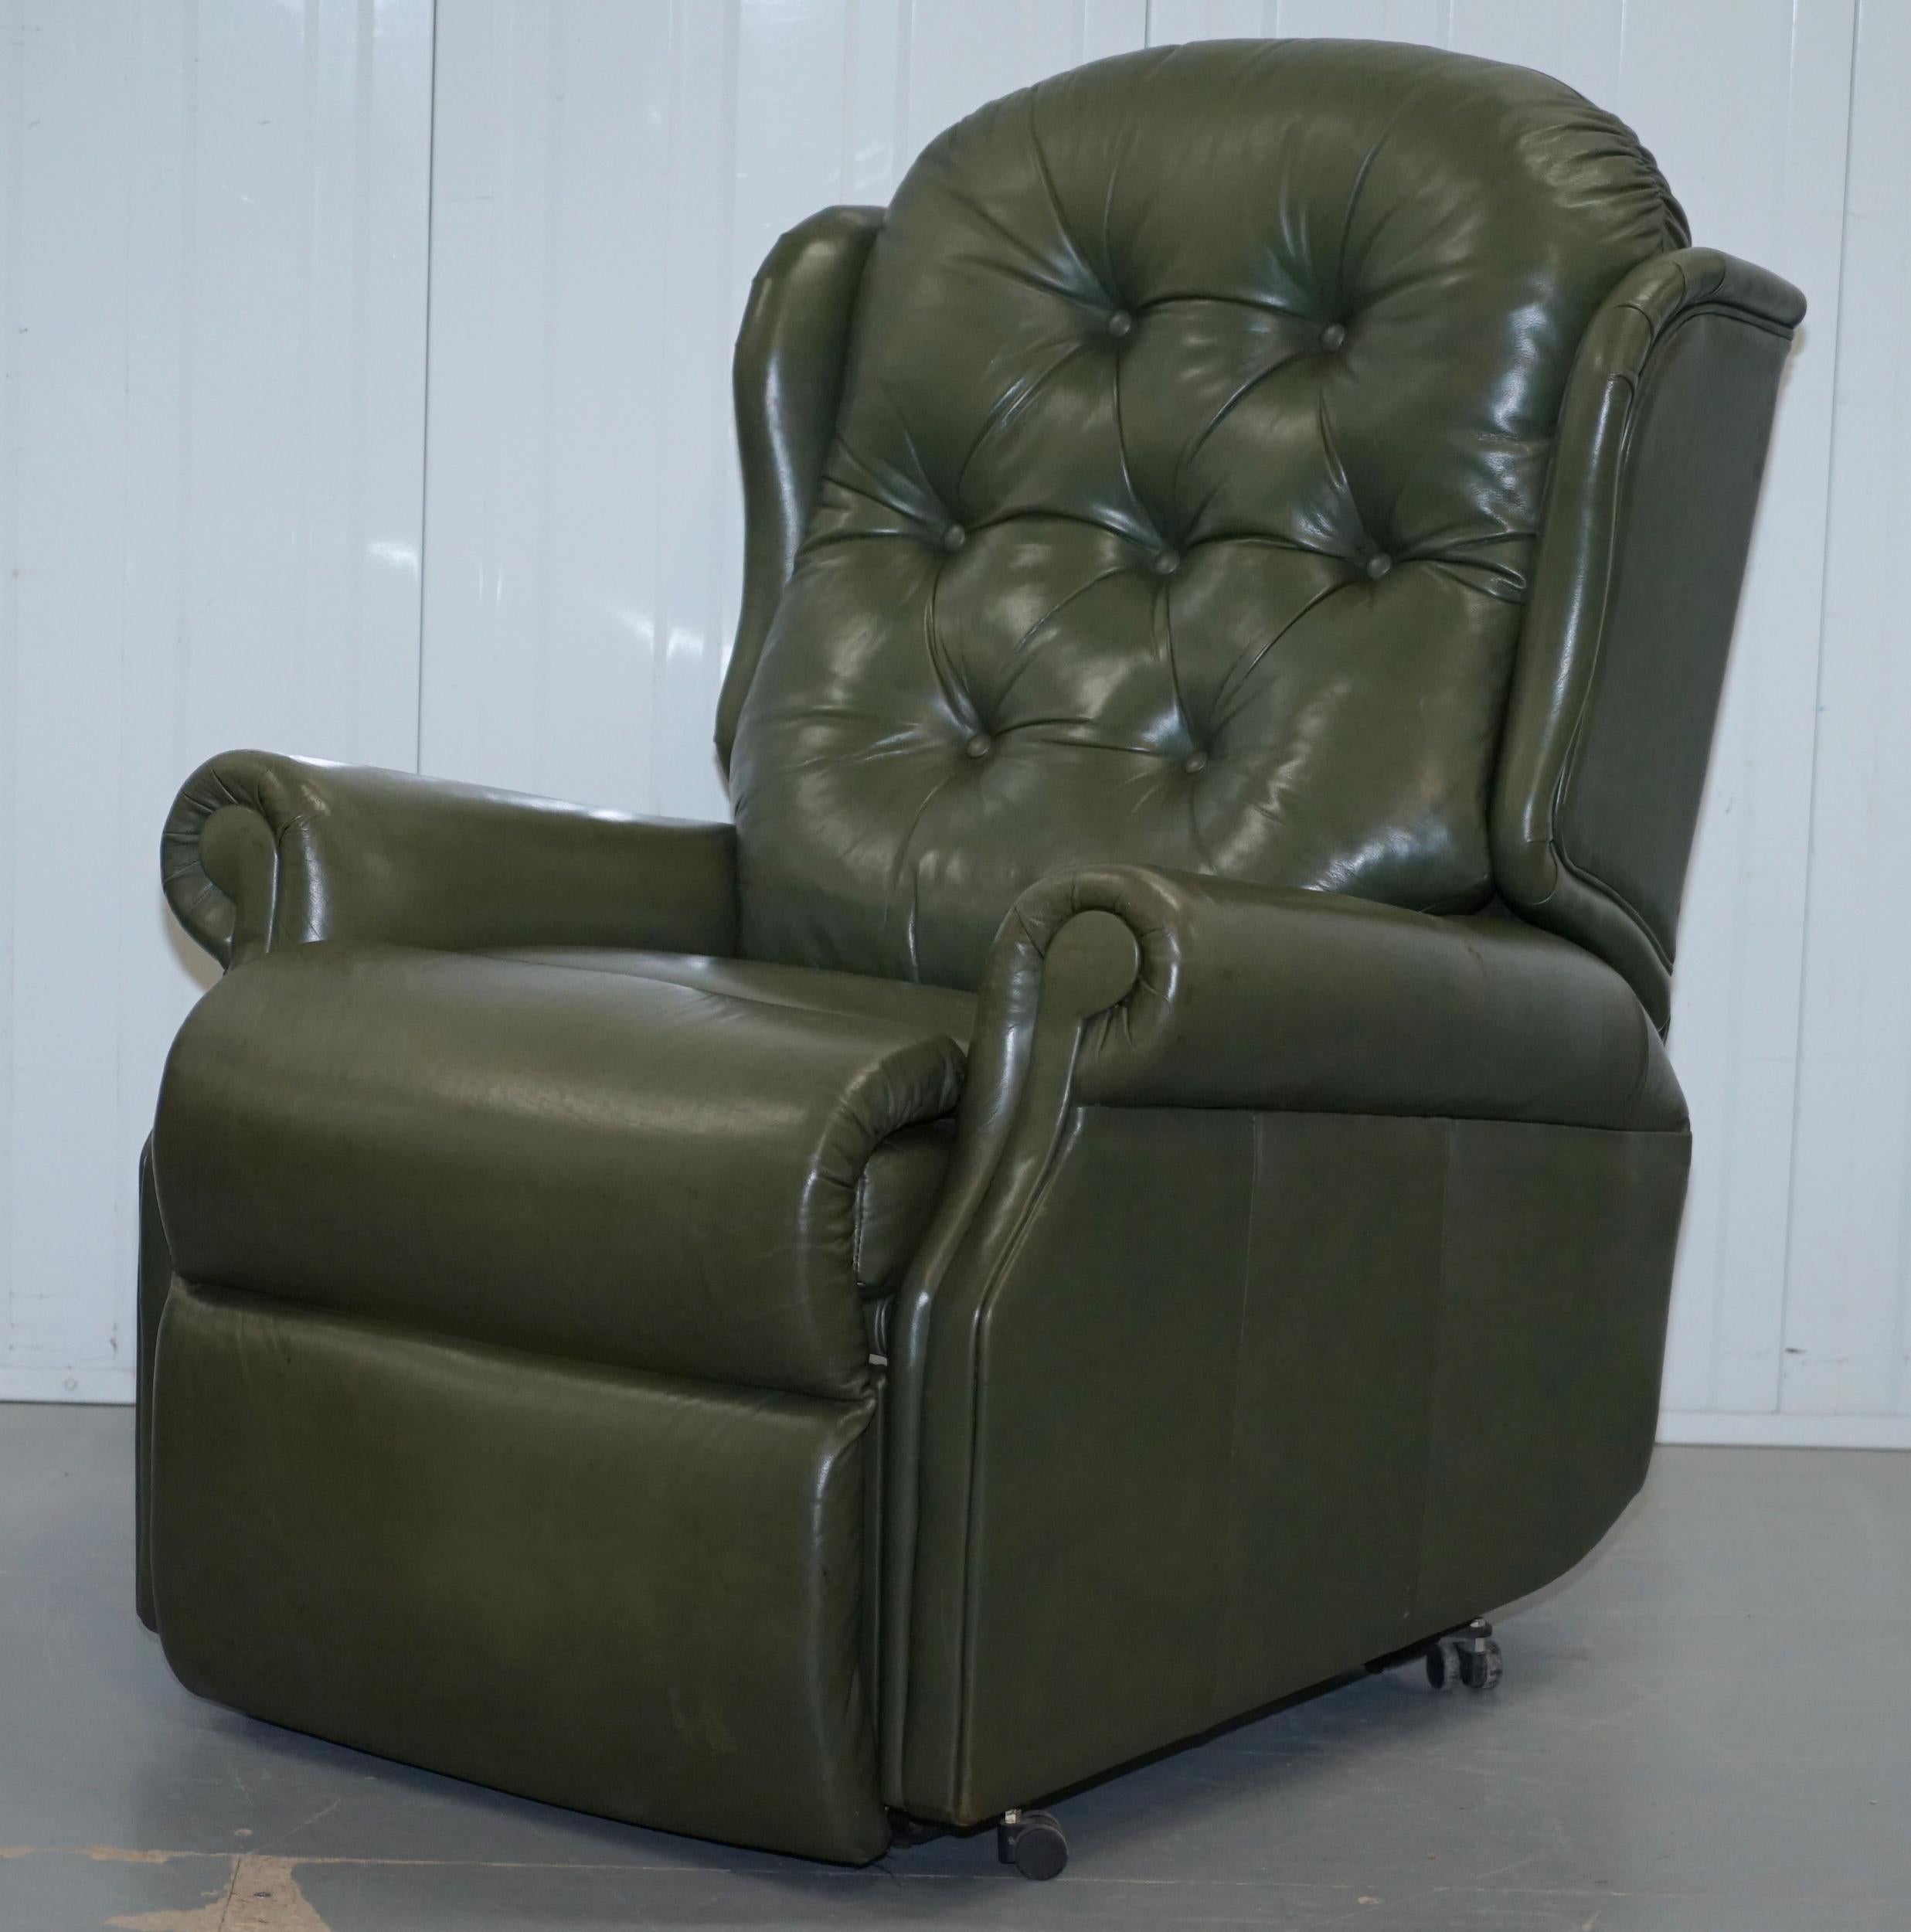 We are delighted to offer for sale this lovely pair of solid green leather Sherbourn Upholstery Lyndon recliner armchairs 

The chairs are in perfect working order, they are manual recline, the backs totally remove for ease of transport, we have